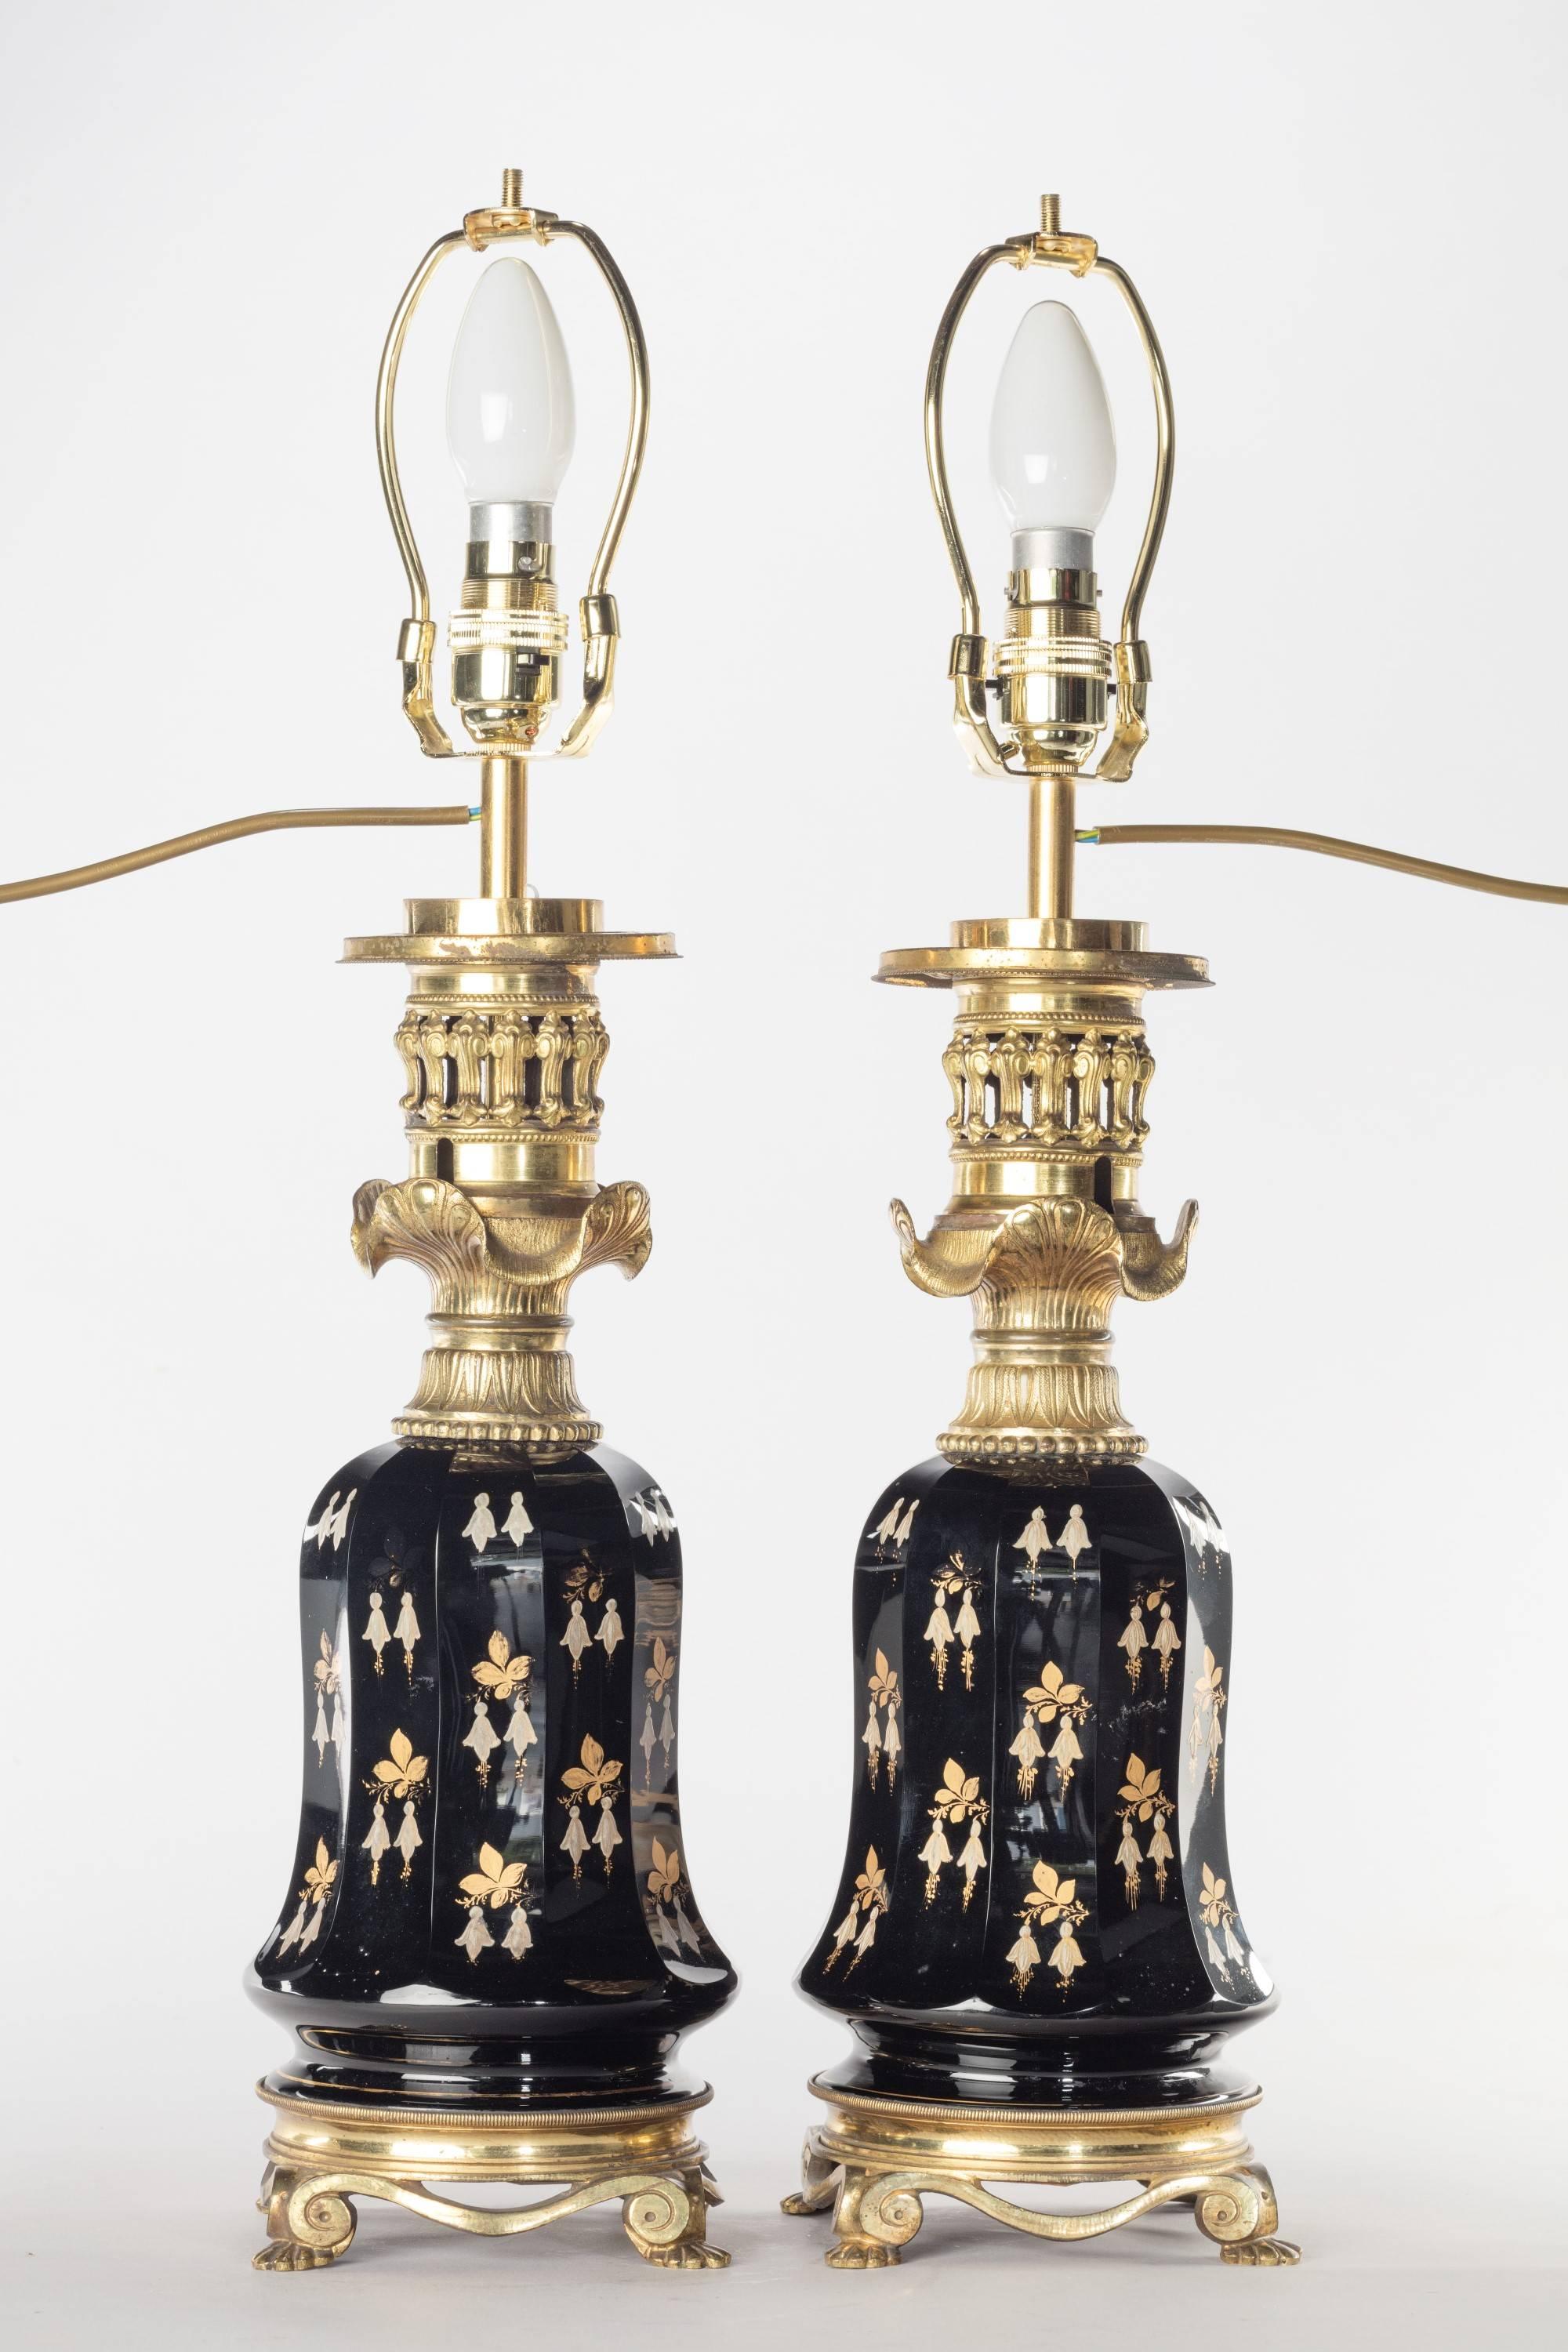 A most attractive pair of faceted glass vases. Fine gilded decoration, retaining original gilt bronze pierced bases and elaborate top.